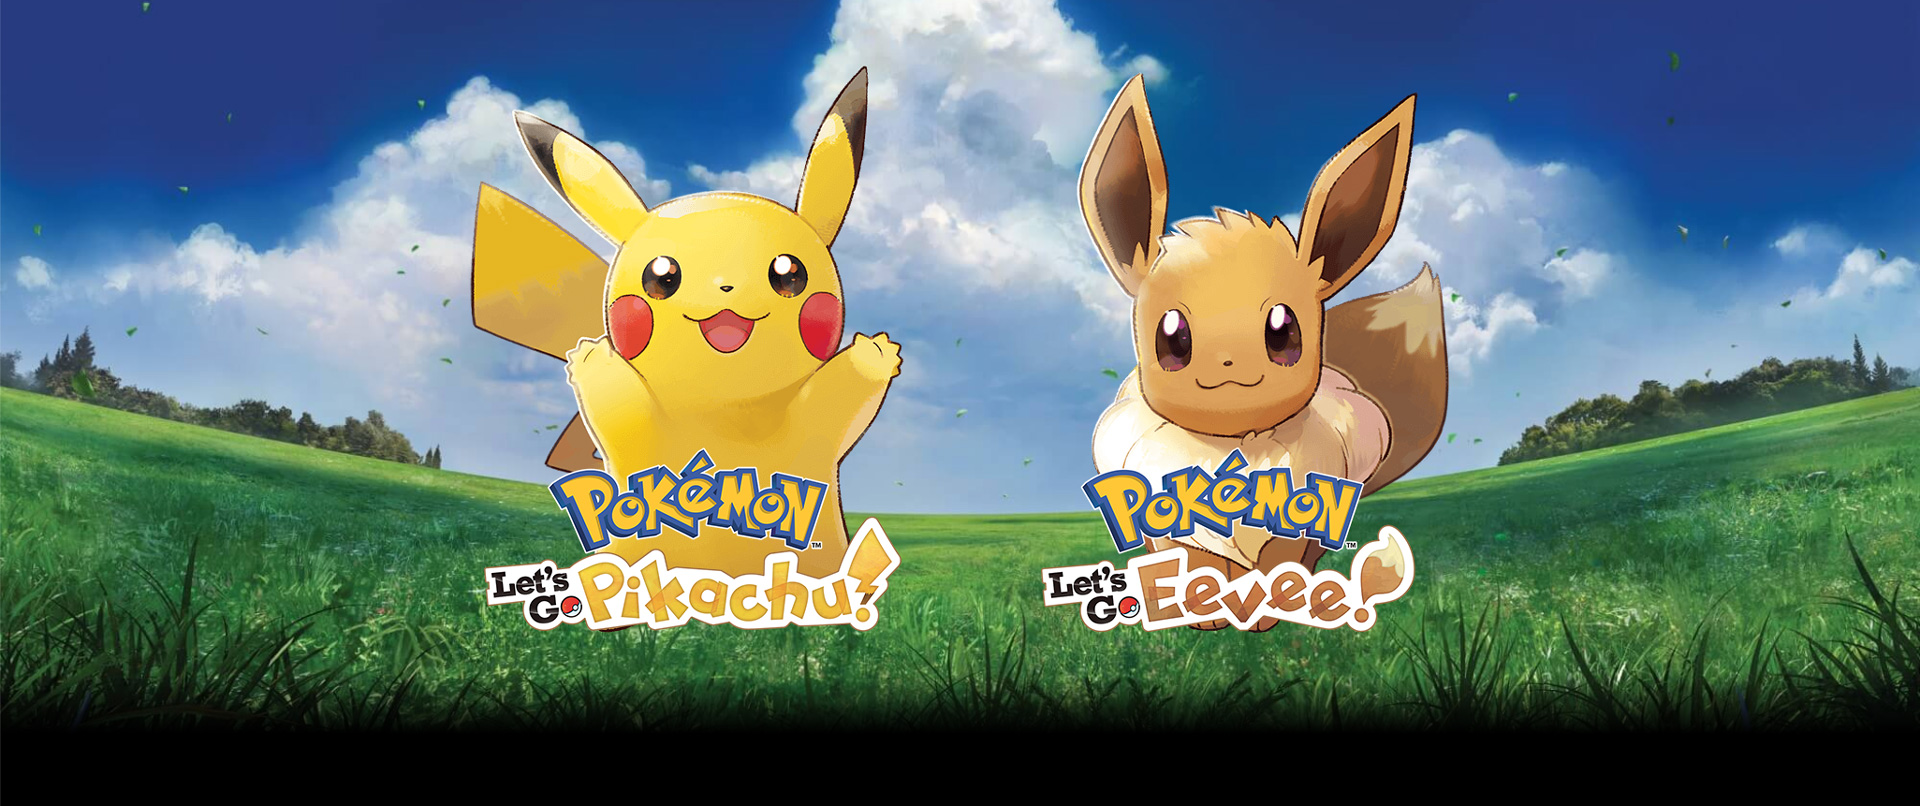 Pokemon Lets go Pikachu and Eevee now available for Nintendo Switch